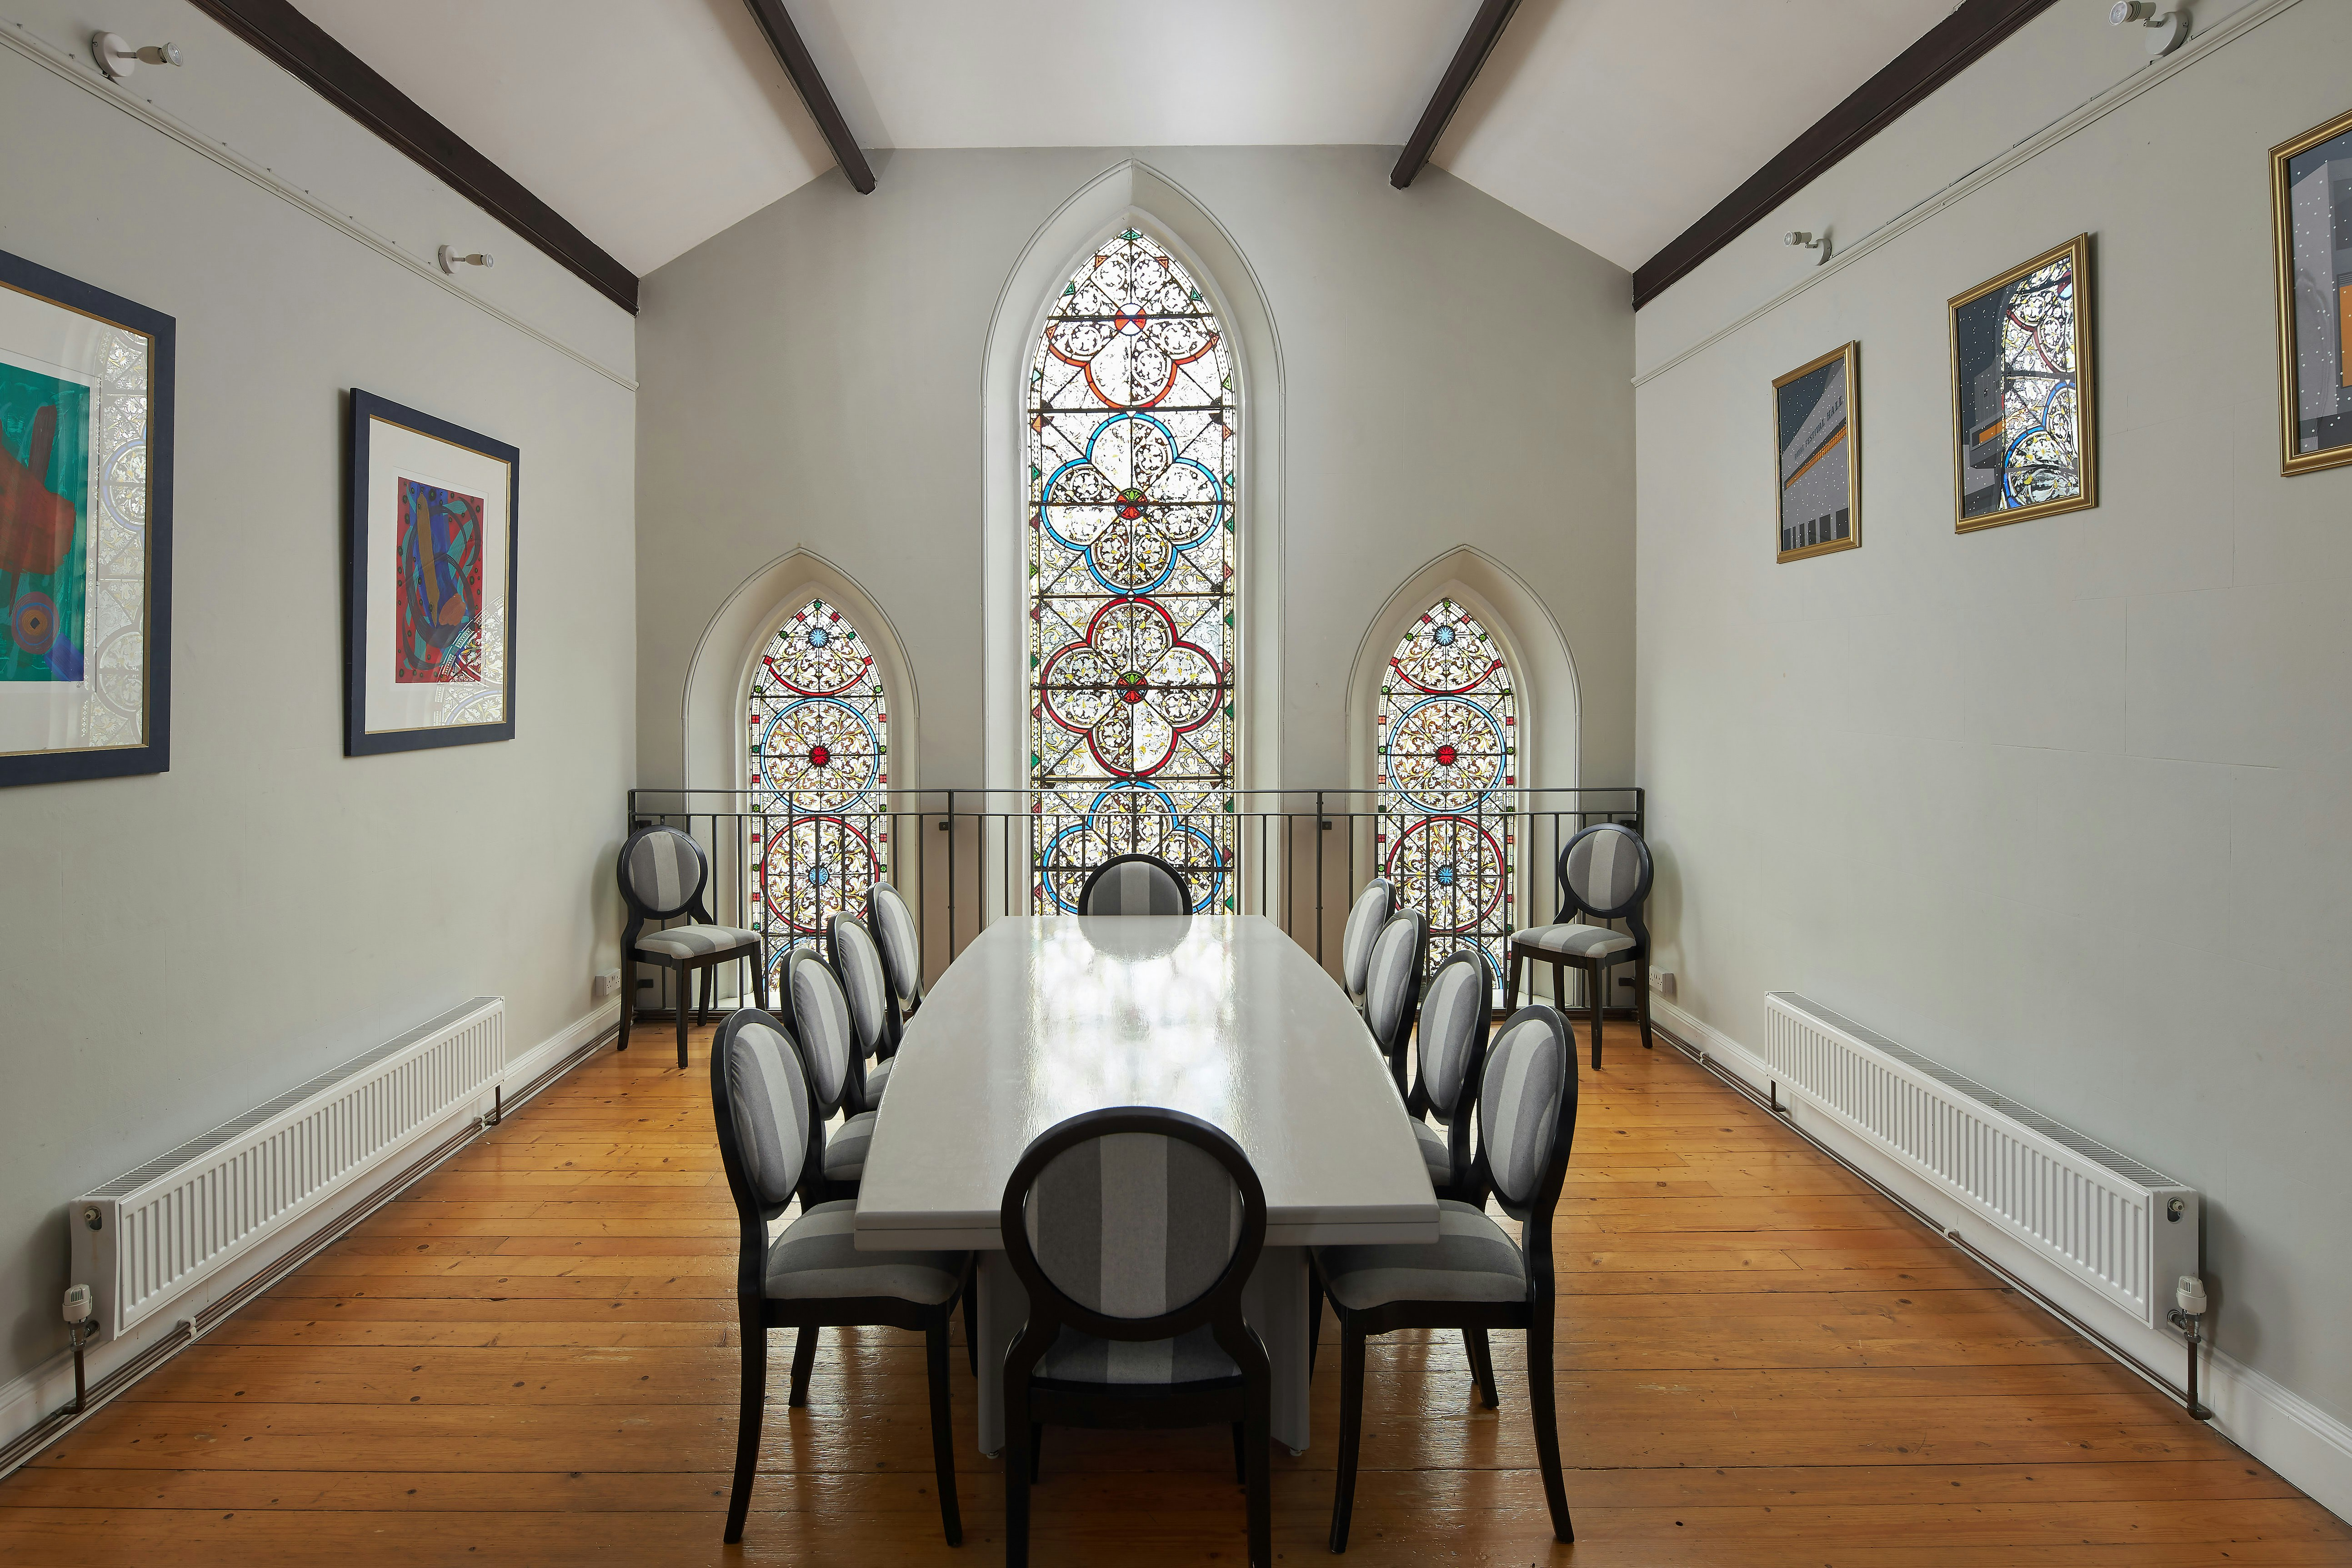 This 19th-century church, complete with stained glass windows, sleeps 14